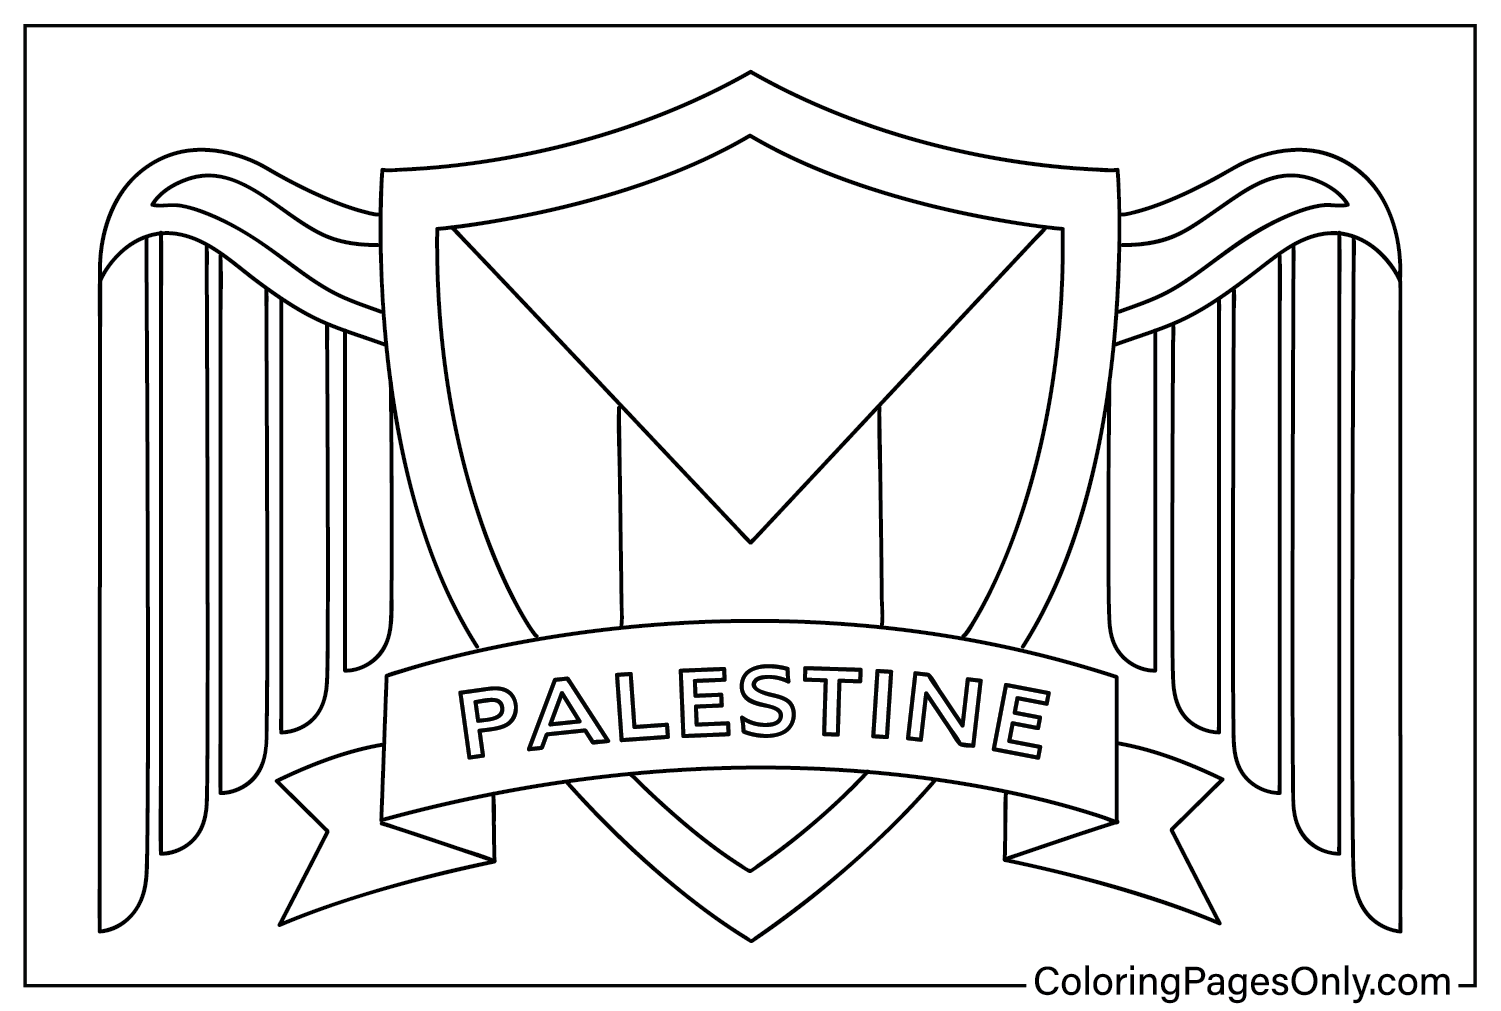 Palestine Coloring from Palestine